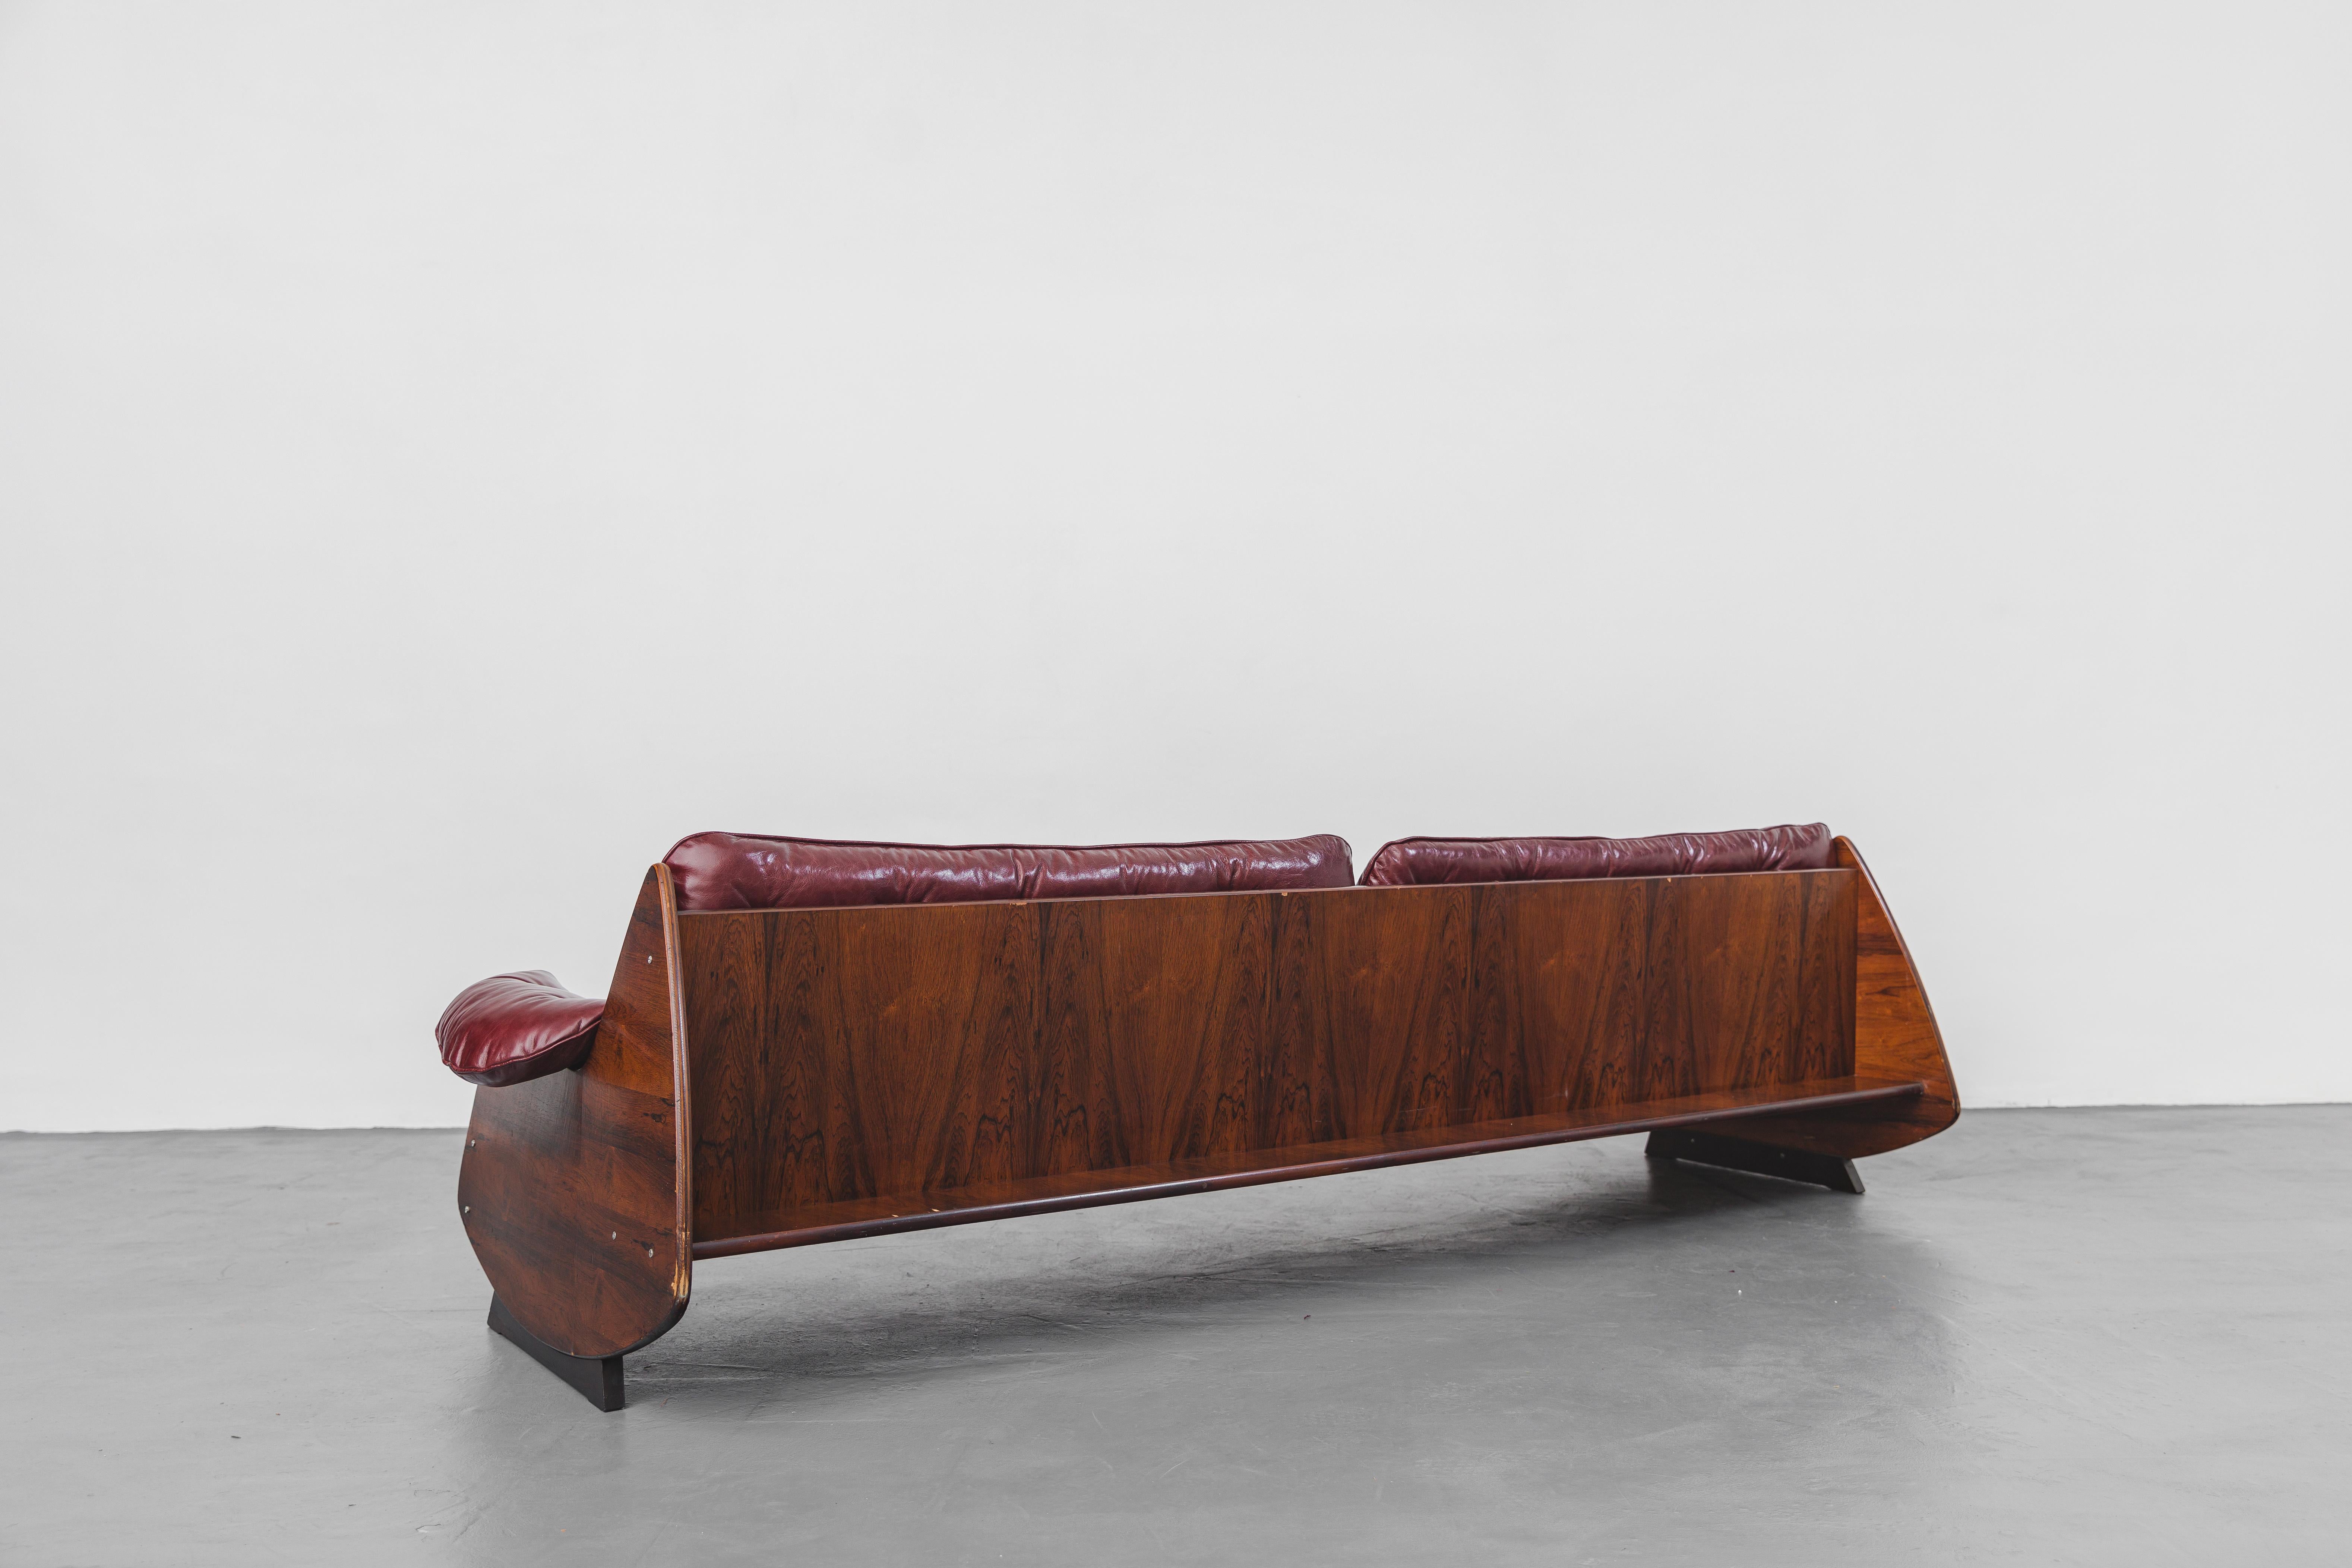 The Ameba Sofa was produced in the 1960s and attributed to Jorge Zalszupin (1922-2020).

The massive Sofa in Rosewood veneers is a perfect combo of organic shapes with oversized leather cushions and back compartments to display small objects and